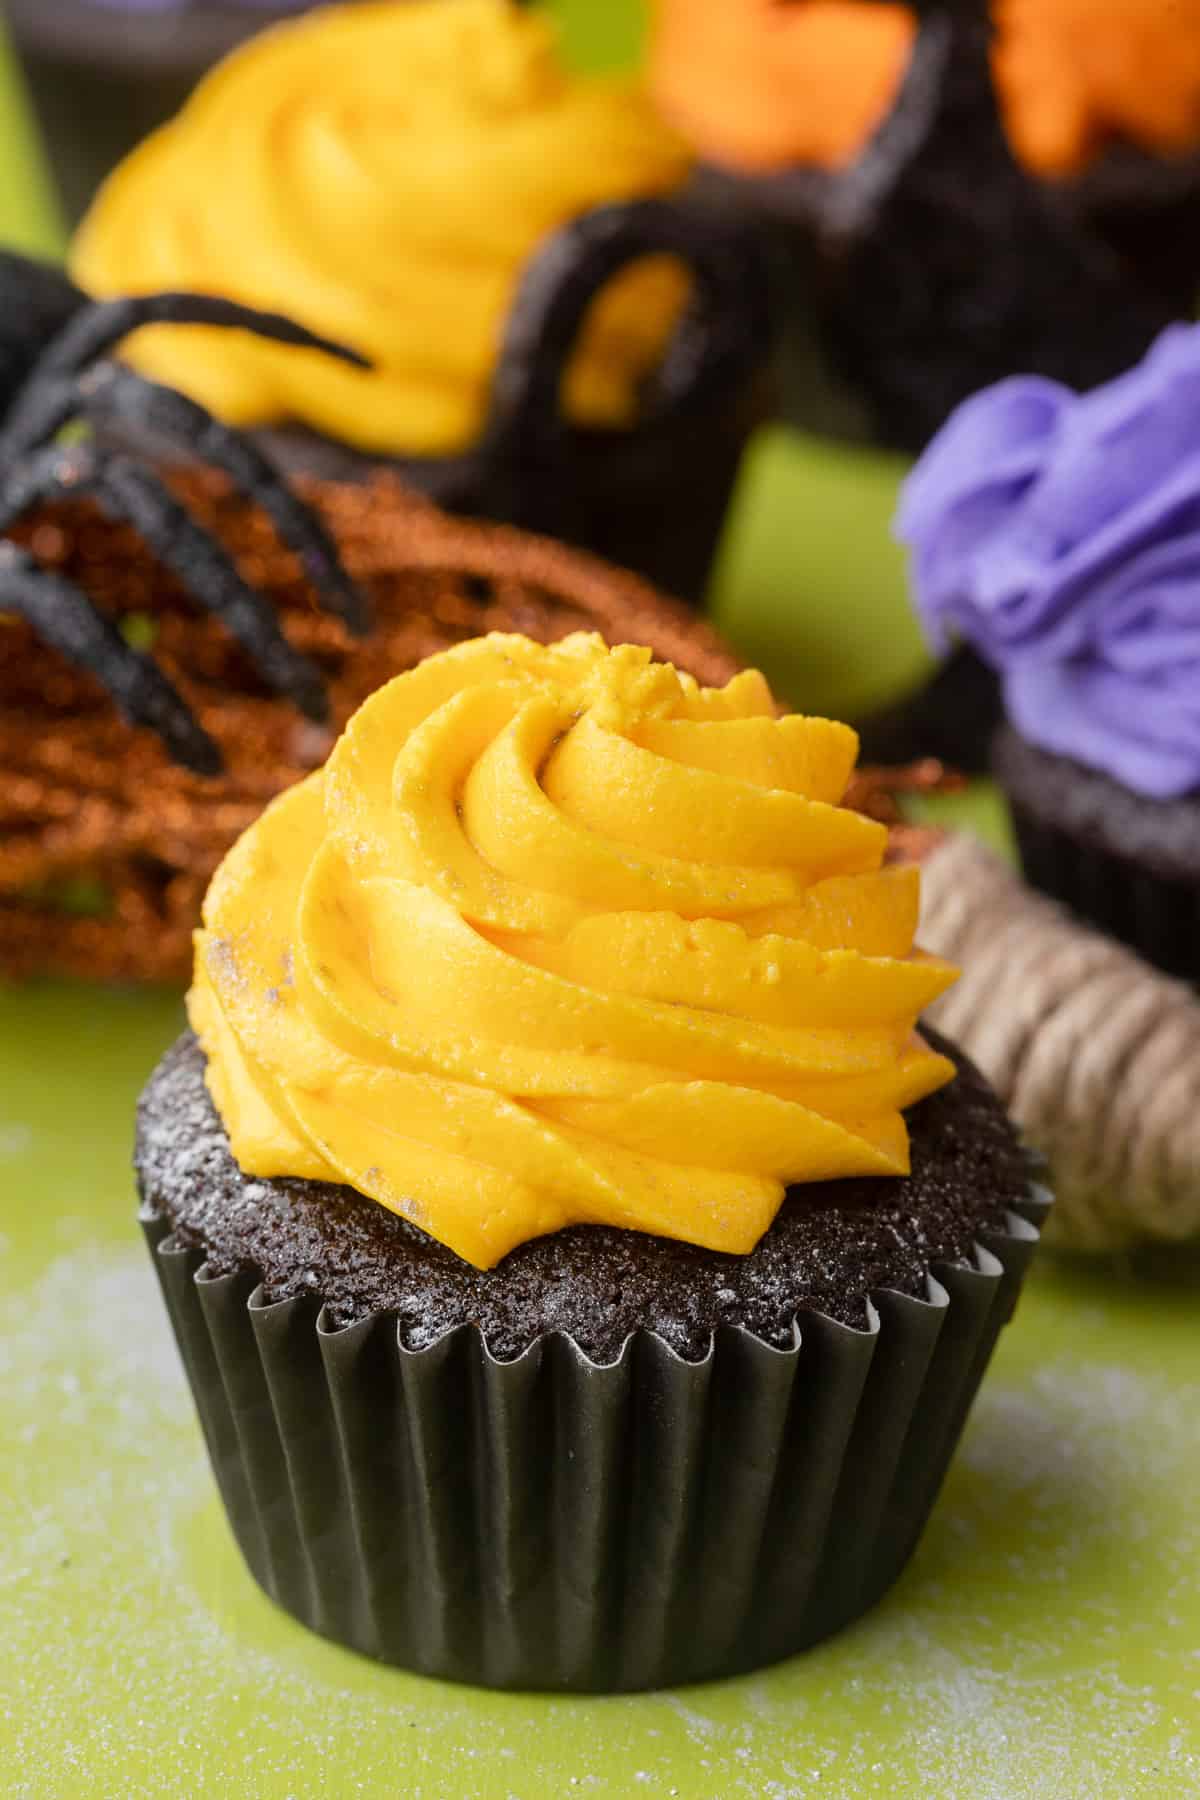 A chocolate cupcake with a swirl of yellow buttercream frosting on top.